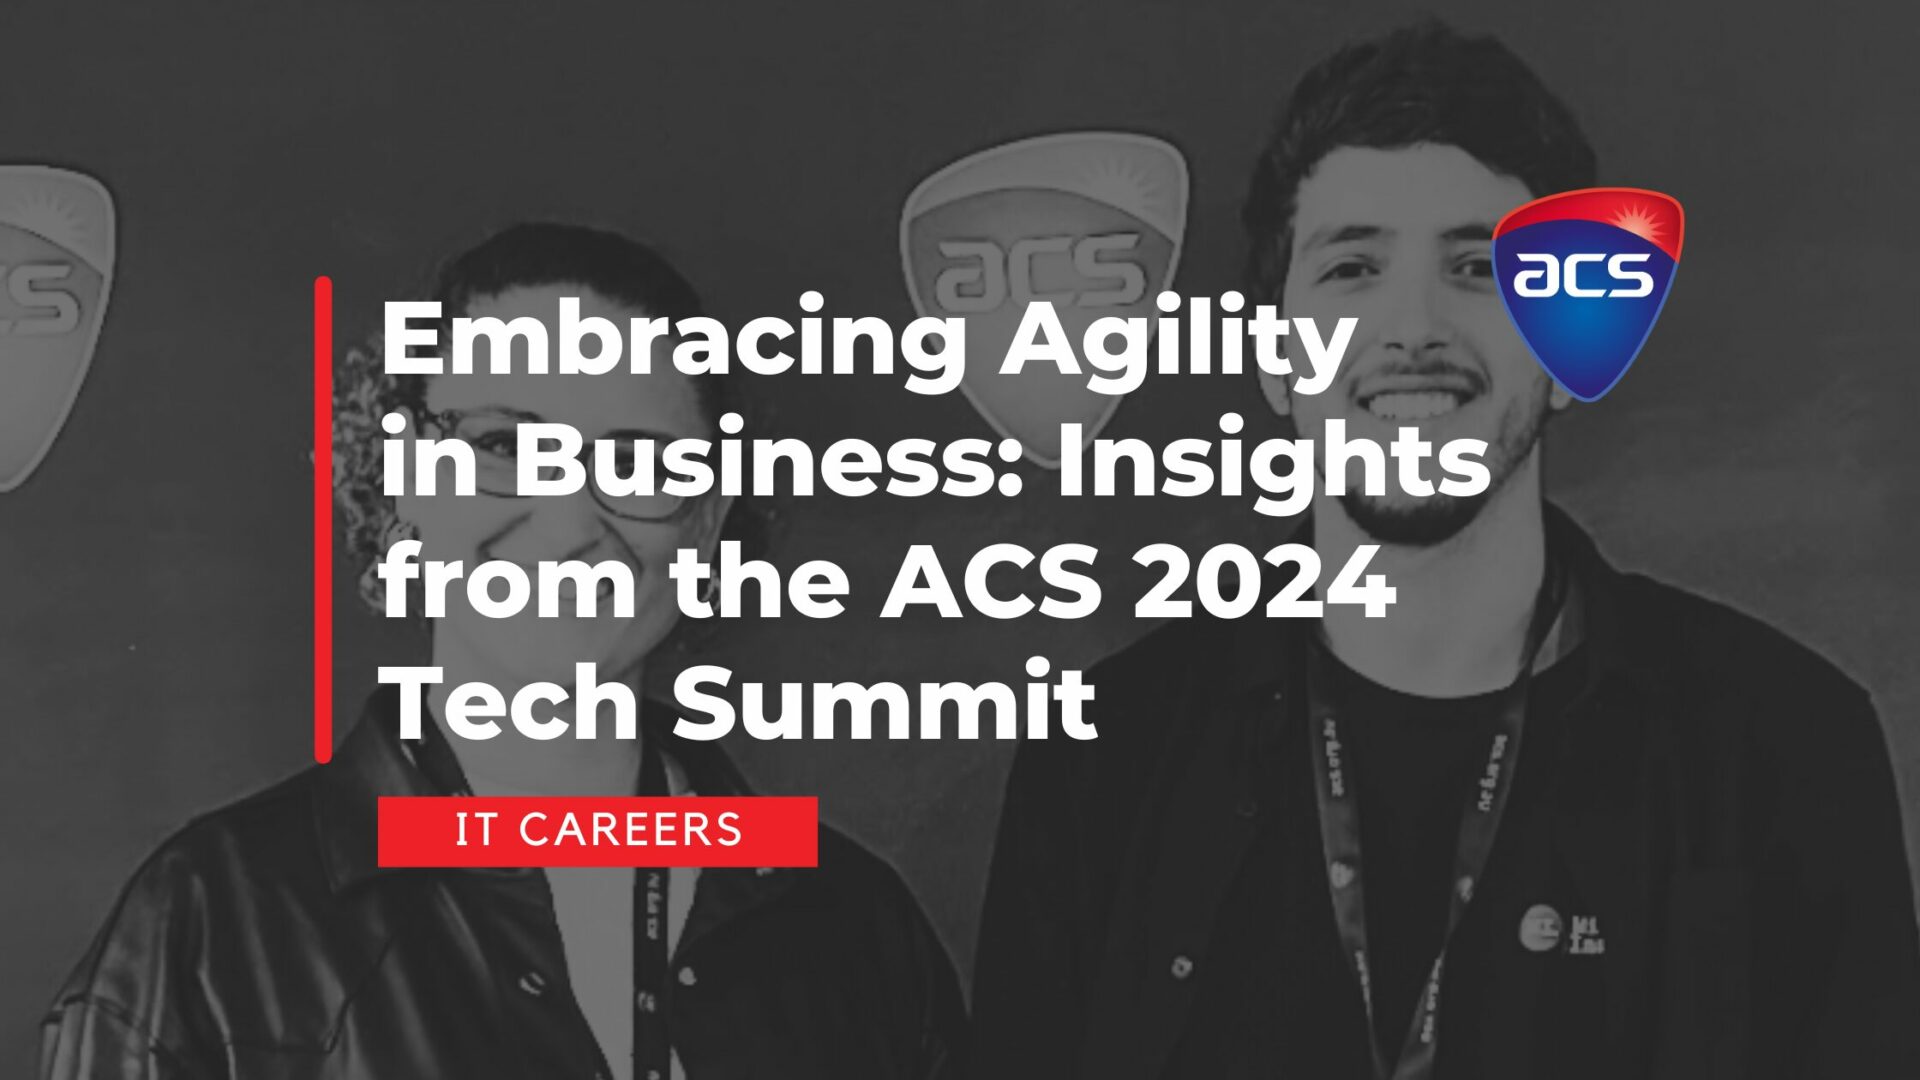 Embracing Agility in Business: Insights from the ACS 2024 Tech Summit